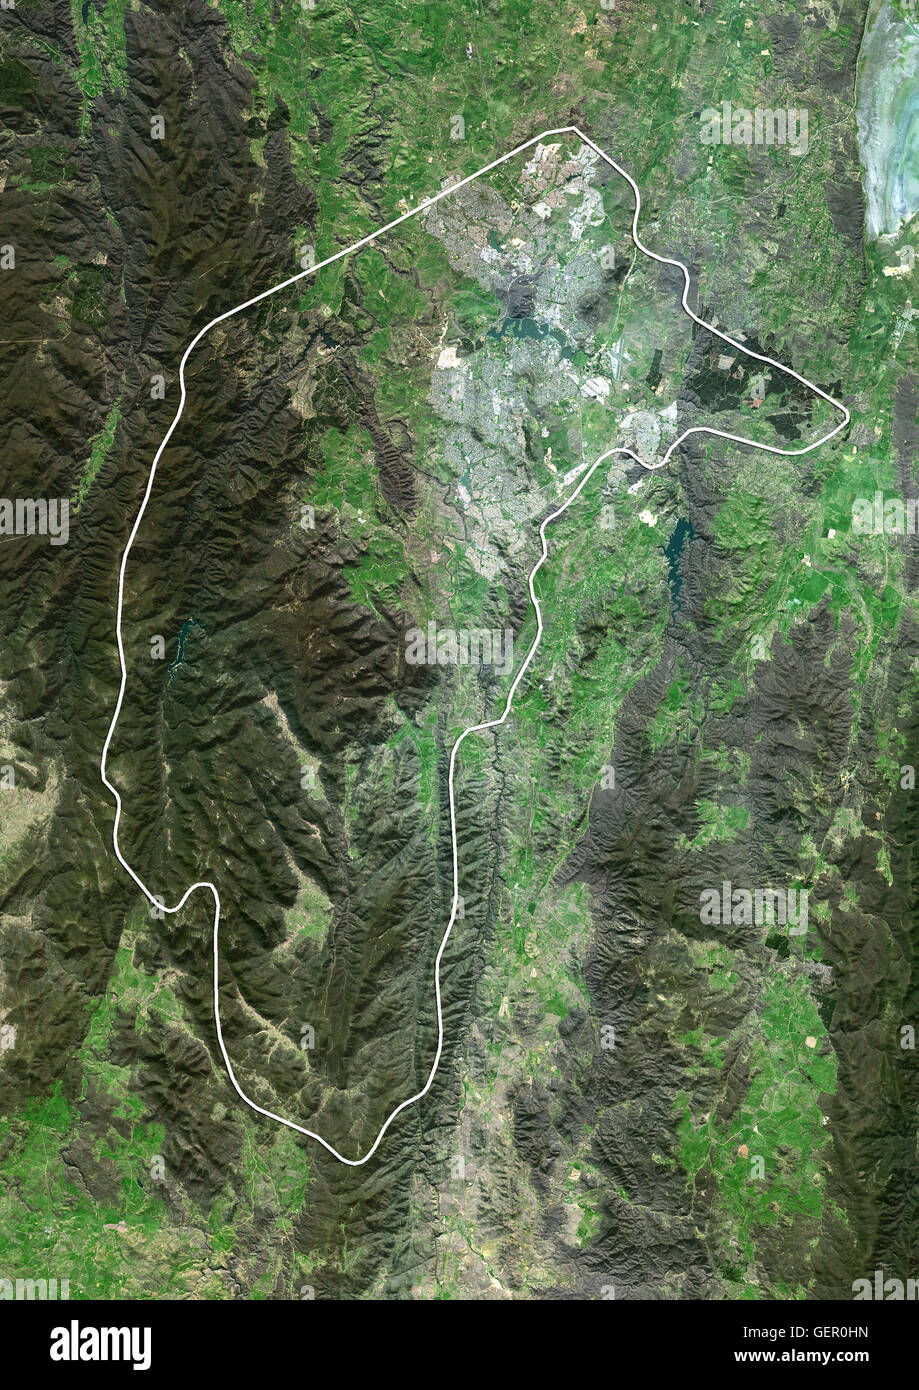 Satellite view of Canberra and the Australian Capital Territory, Australia (with administrative boundaries). Canberra is the capital city of Australia. This image was compiled from data acquired by Landsat 8 satellite in 2014. Stock Photo